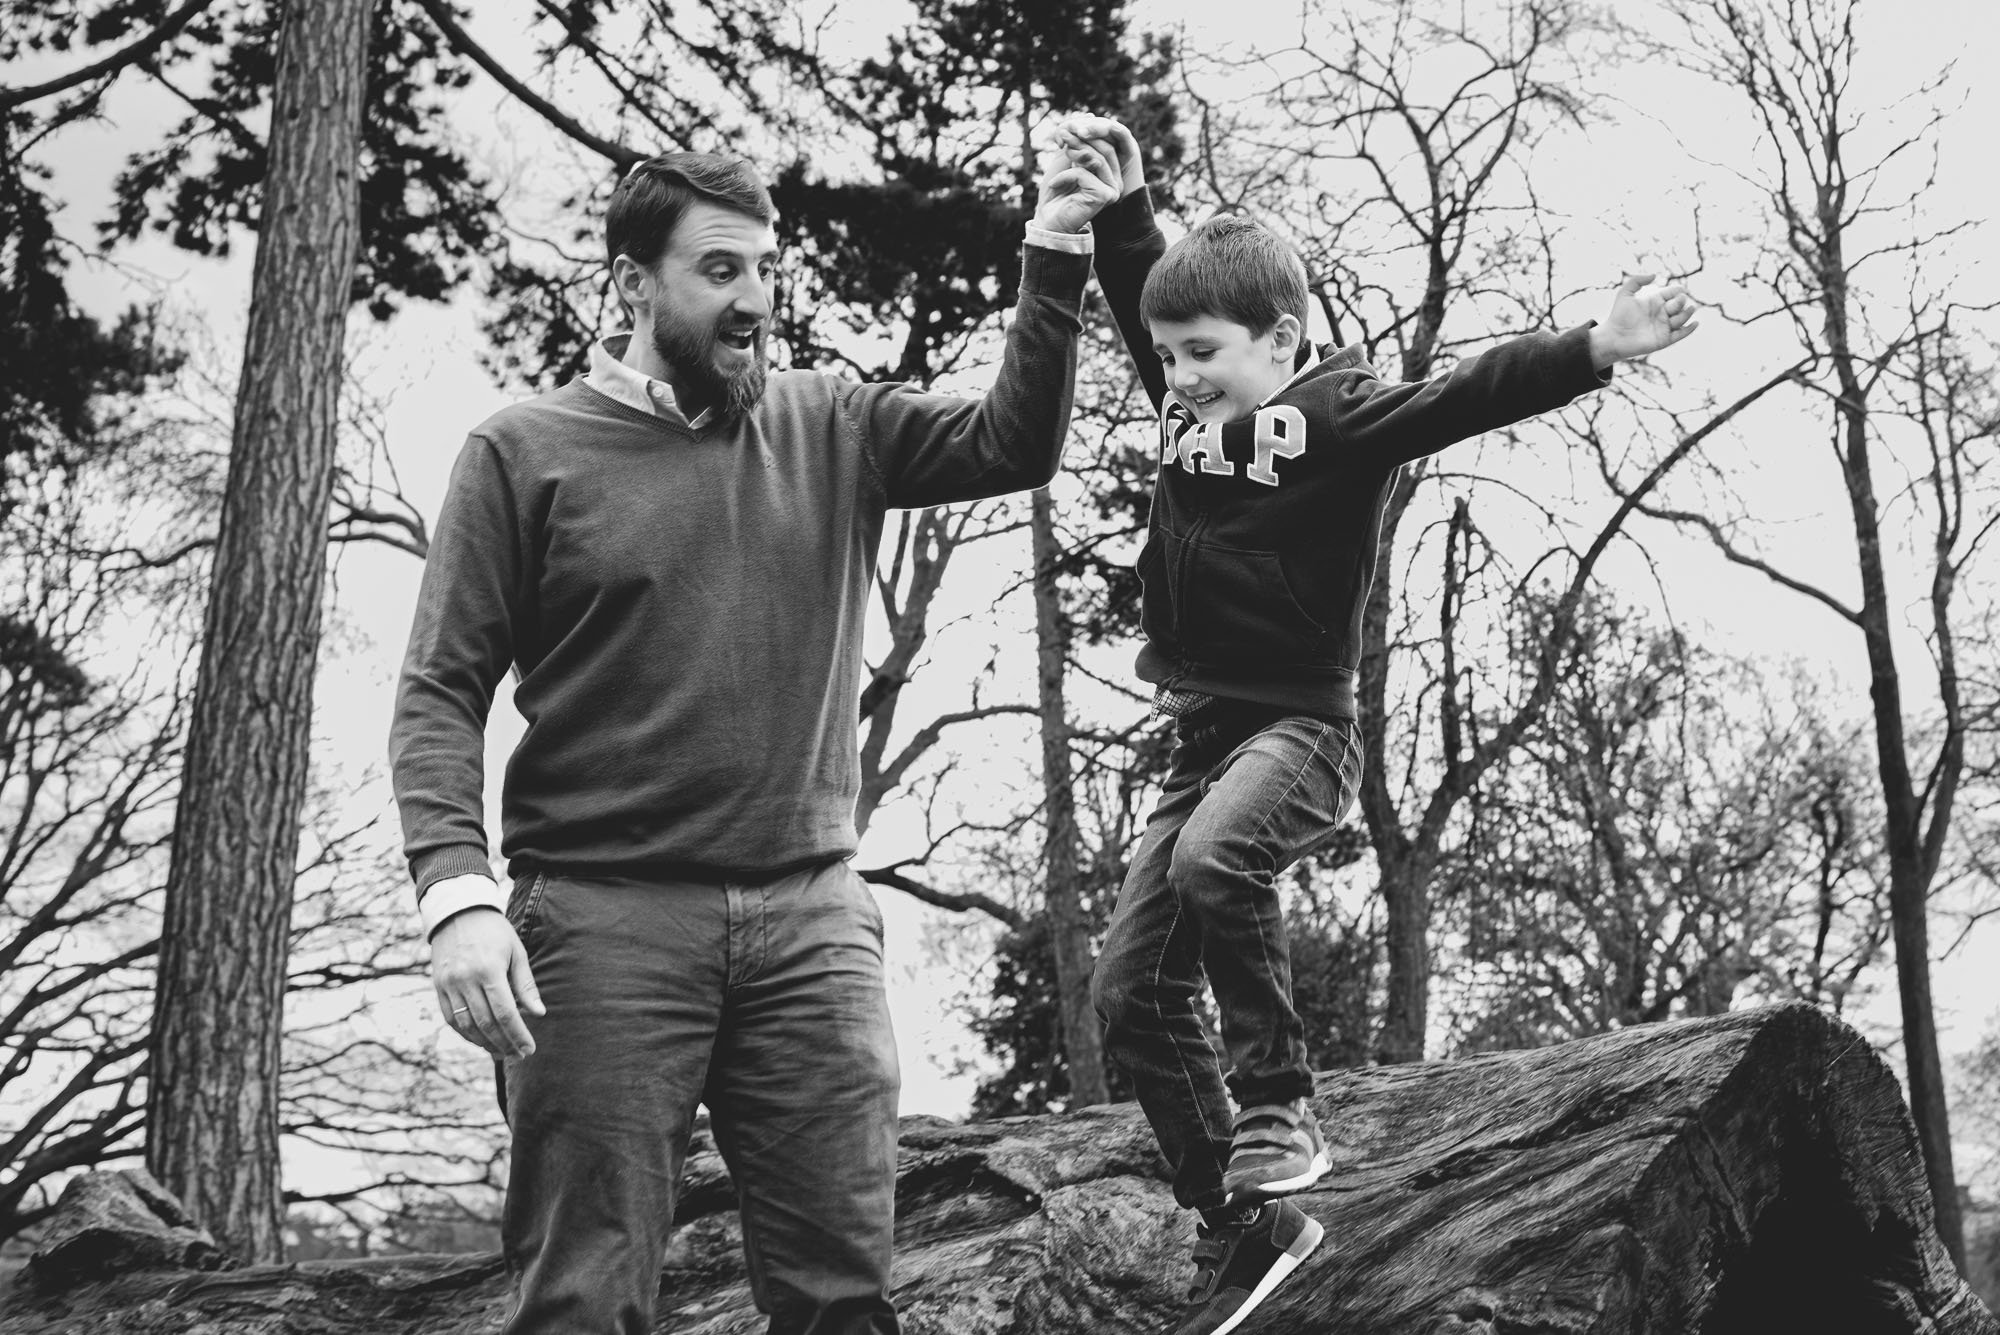 dad-son-walking-tree-trunk-park-natural-candid-children-photography-east-dulwich-peckham-rue-park-black-and-white-family-portrait.jpg